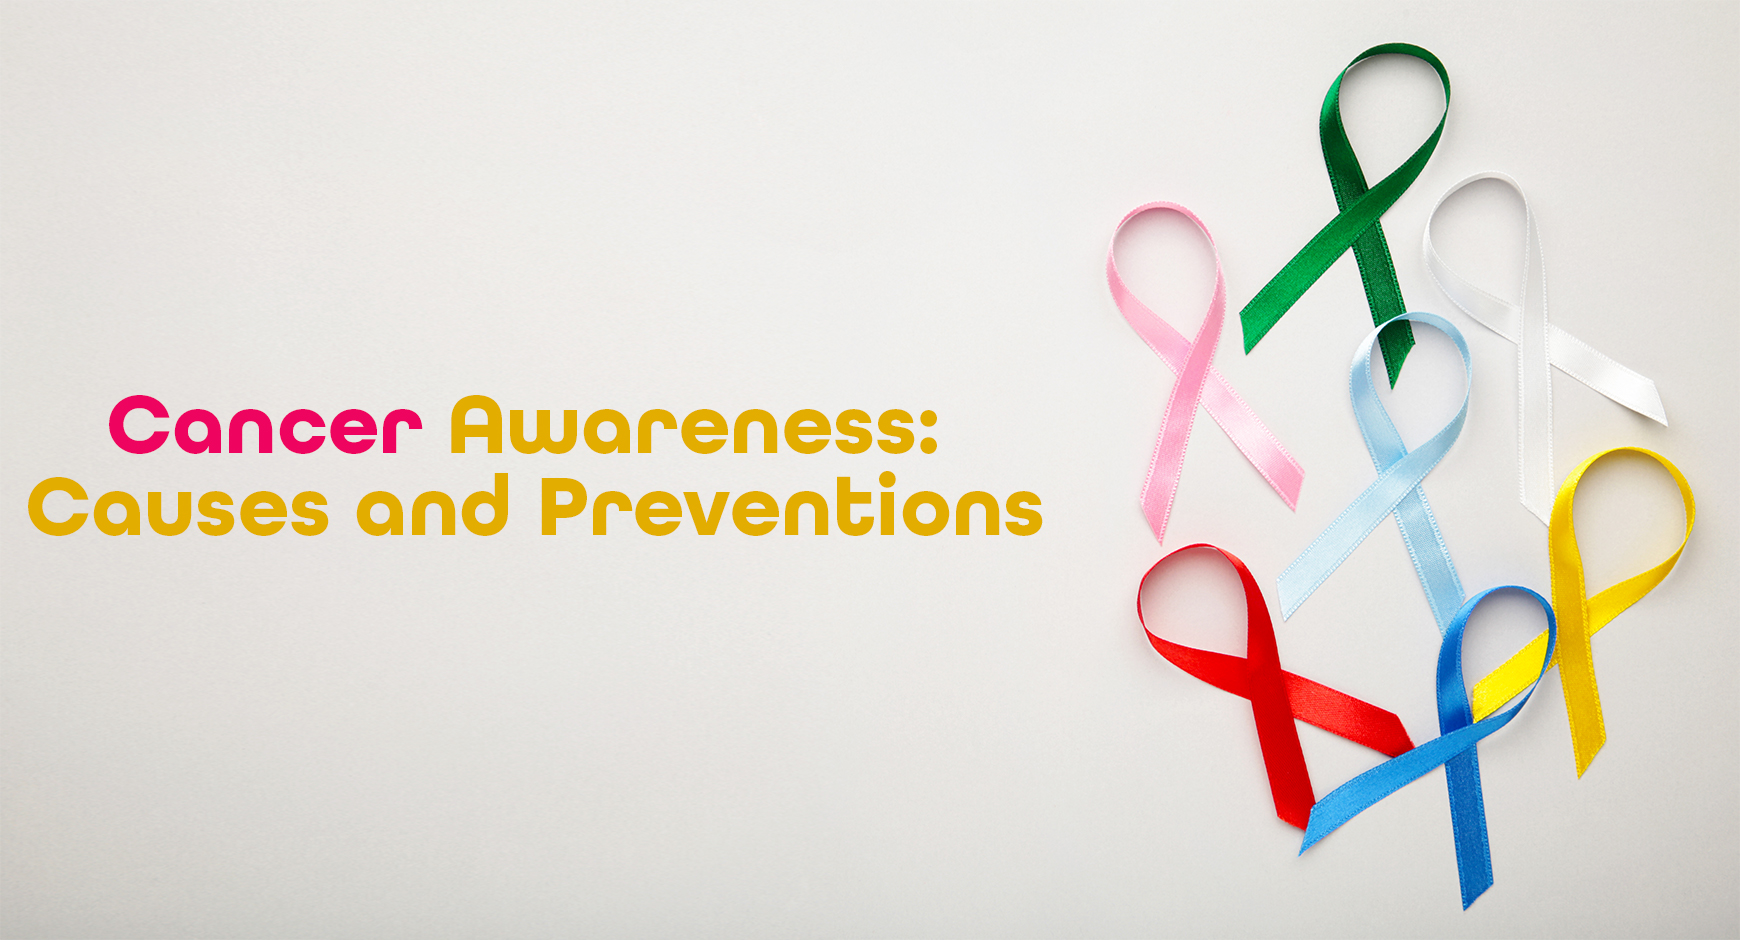 Cancer Awareness: Causes and Preventions